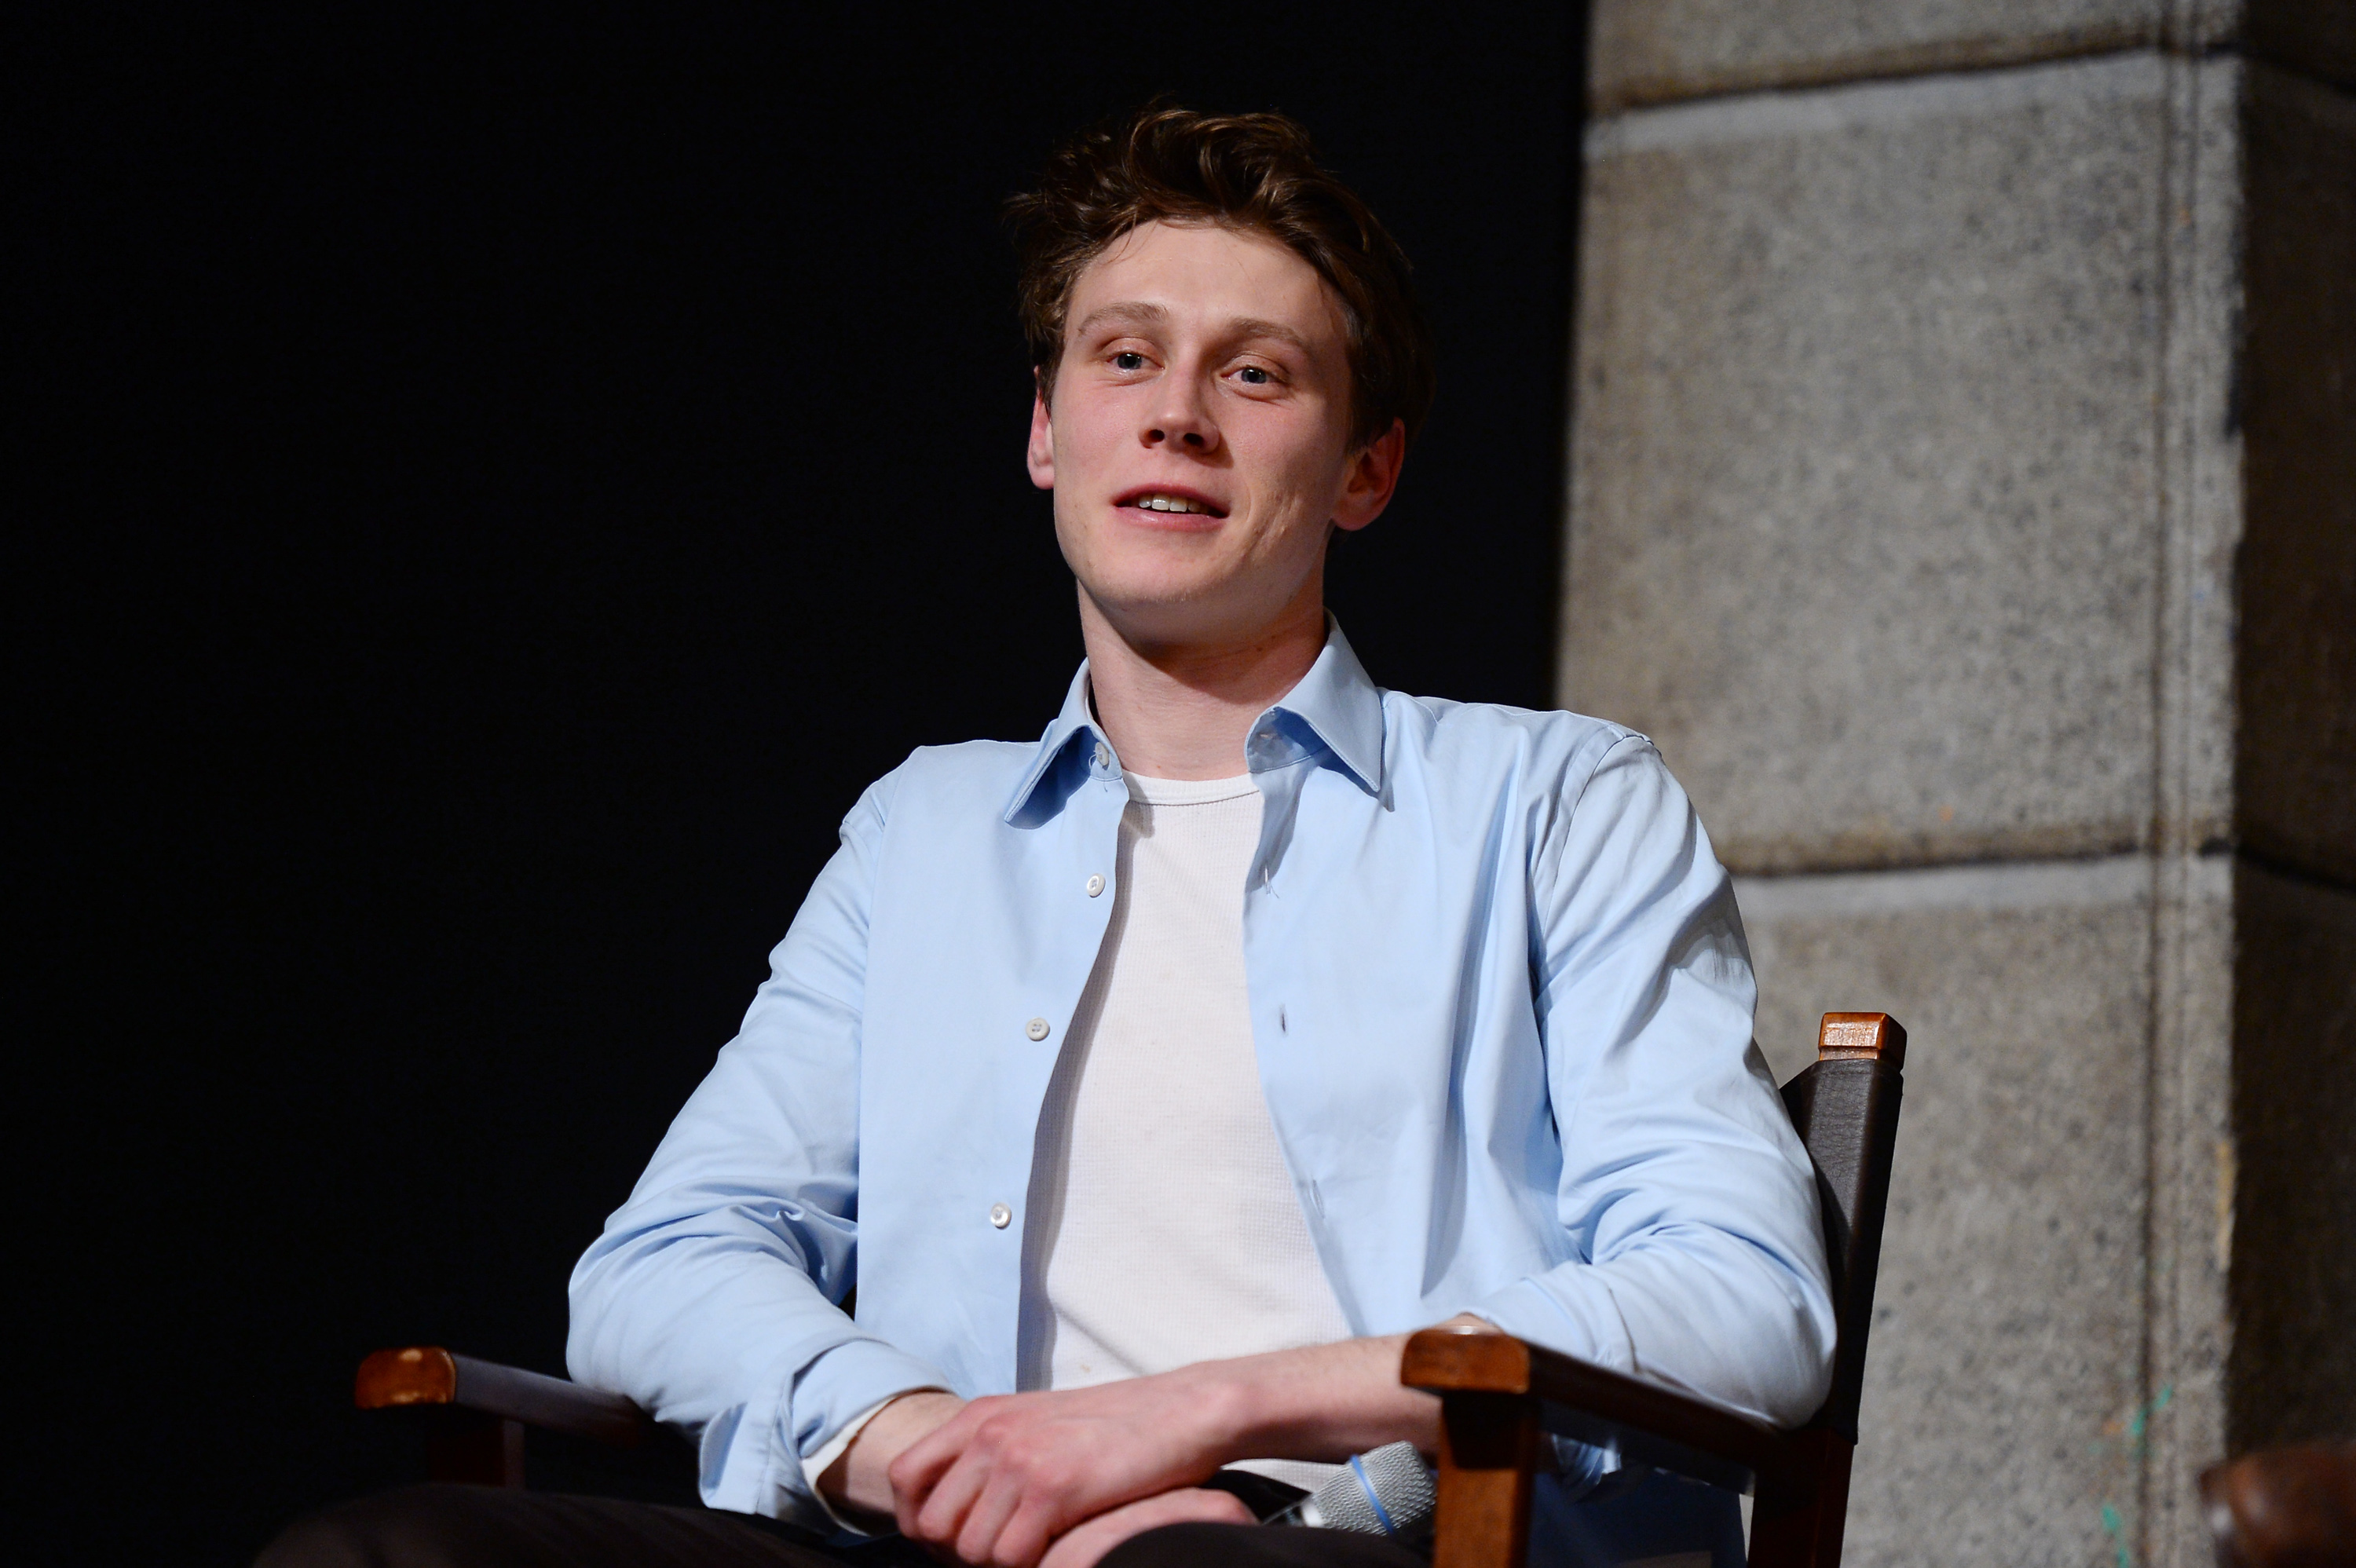 Actor George MacKay attends the "11.22.63" Sundance premiere Q&A on January 28, 2016, in Park City, Utah | Source: Getty Images